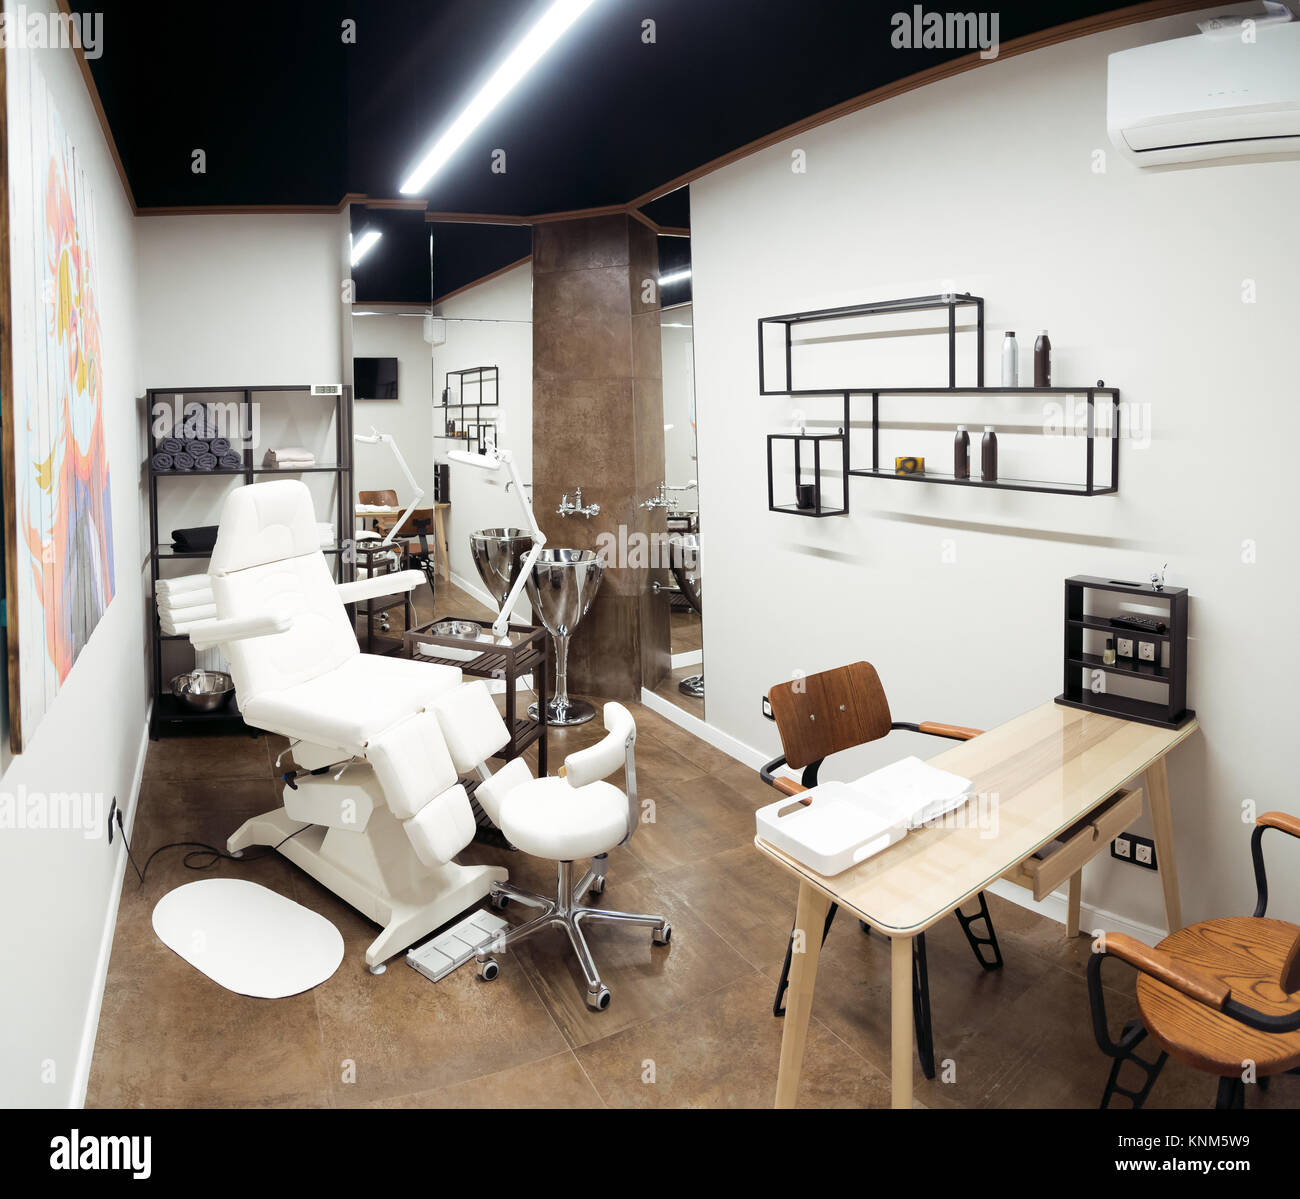 Interior View Of Luxury Beauty And Barbershop Salon Stock